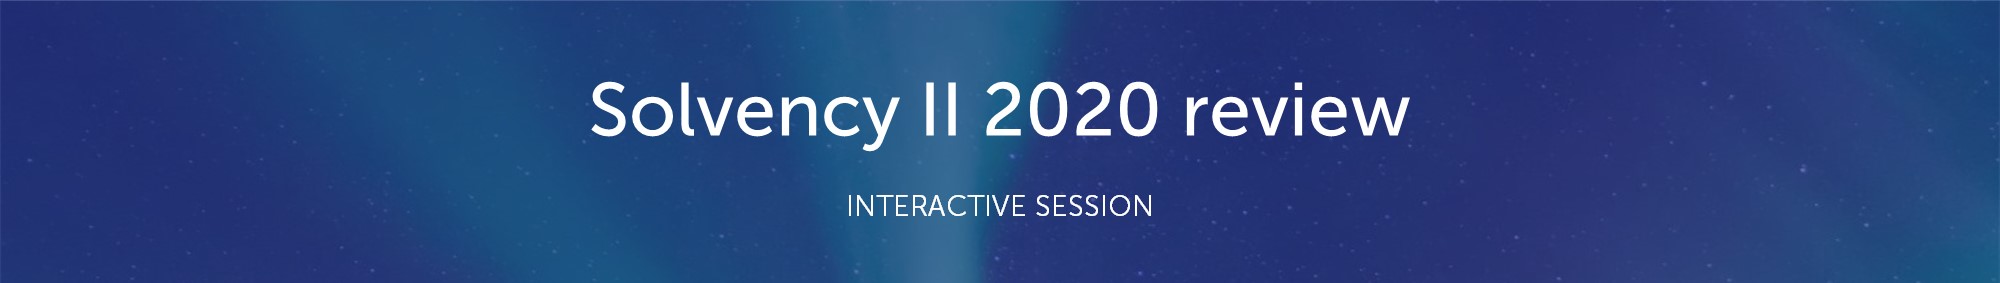 Solvency II 2020 Review workshop for insurers